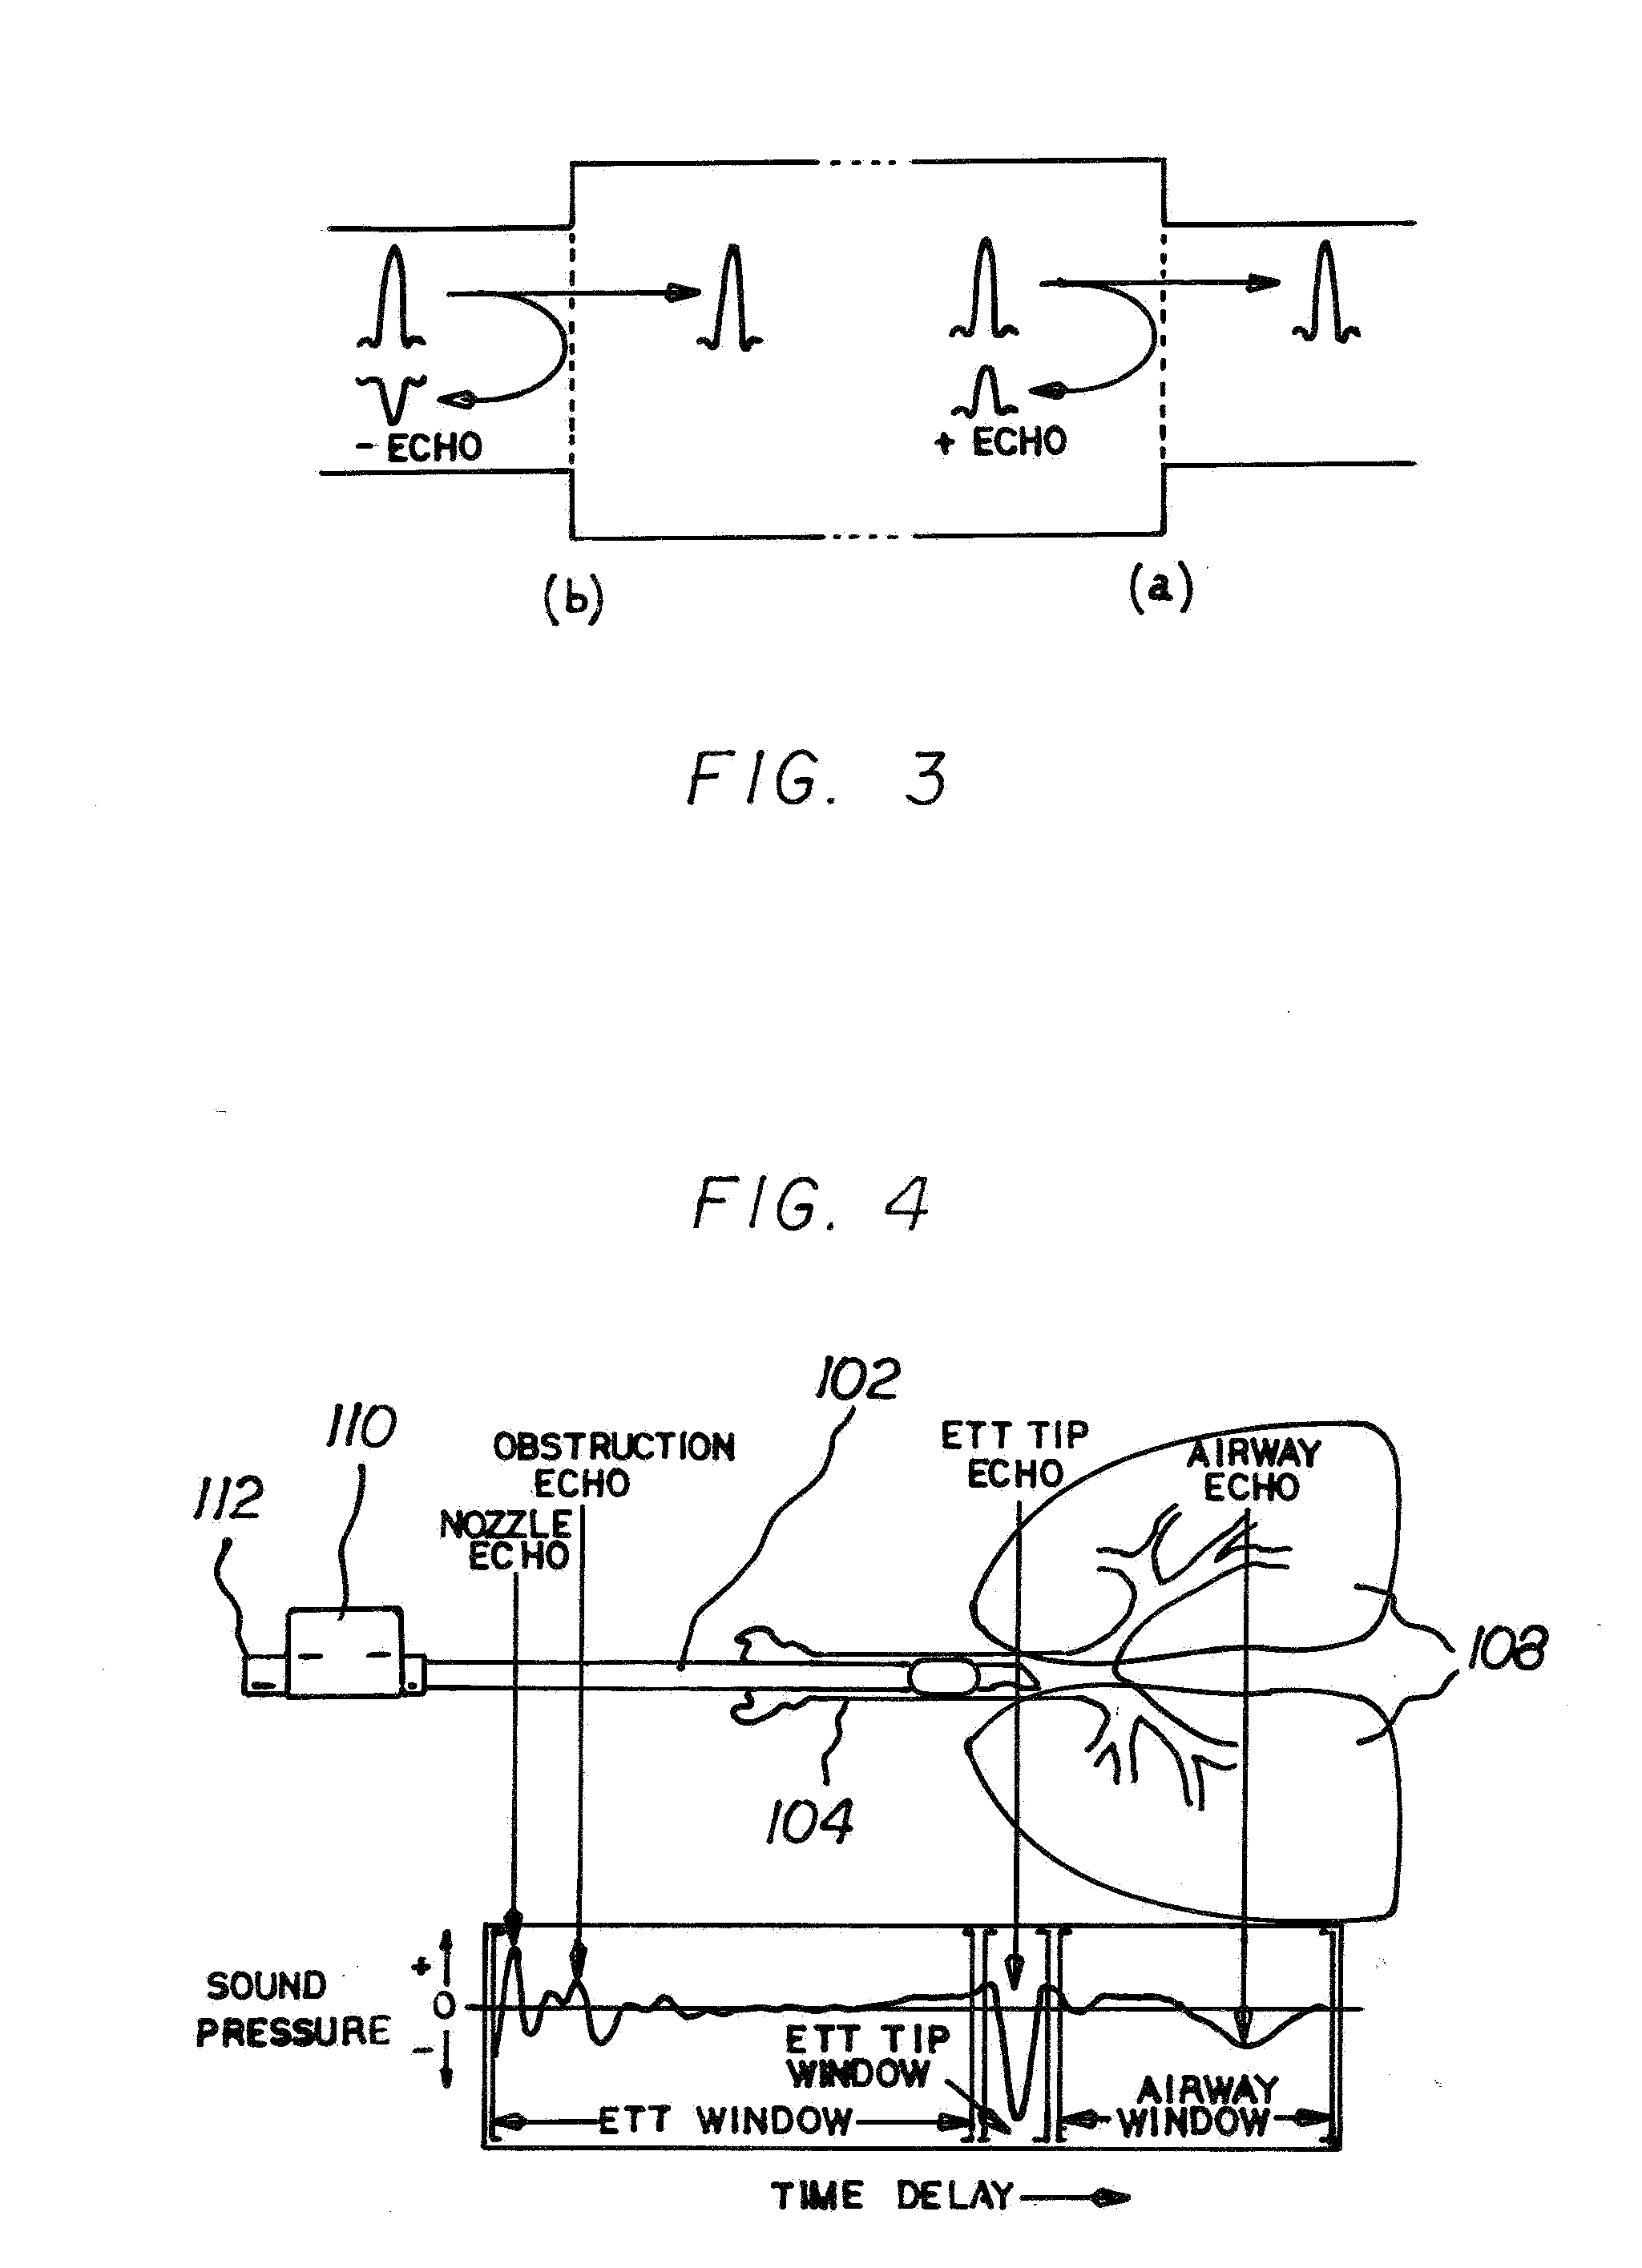 System and Method for Use of Acoustic Reflectometry Information in Ventilation Devices